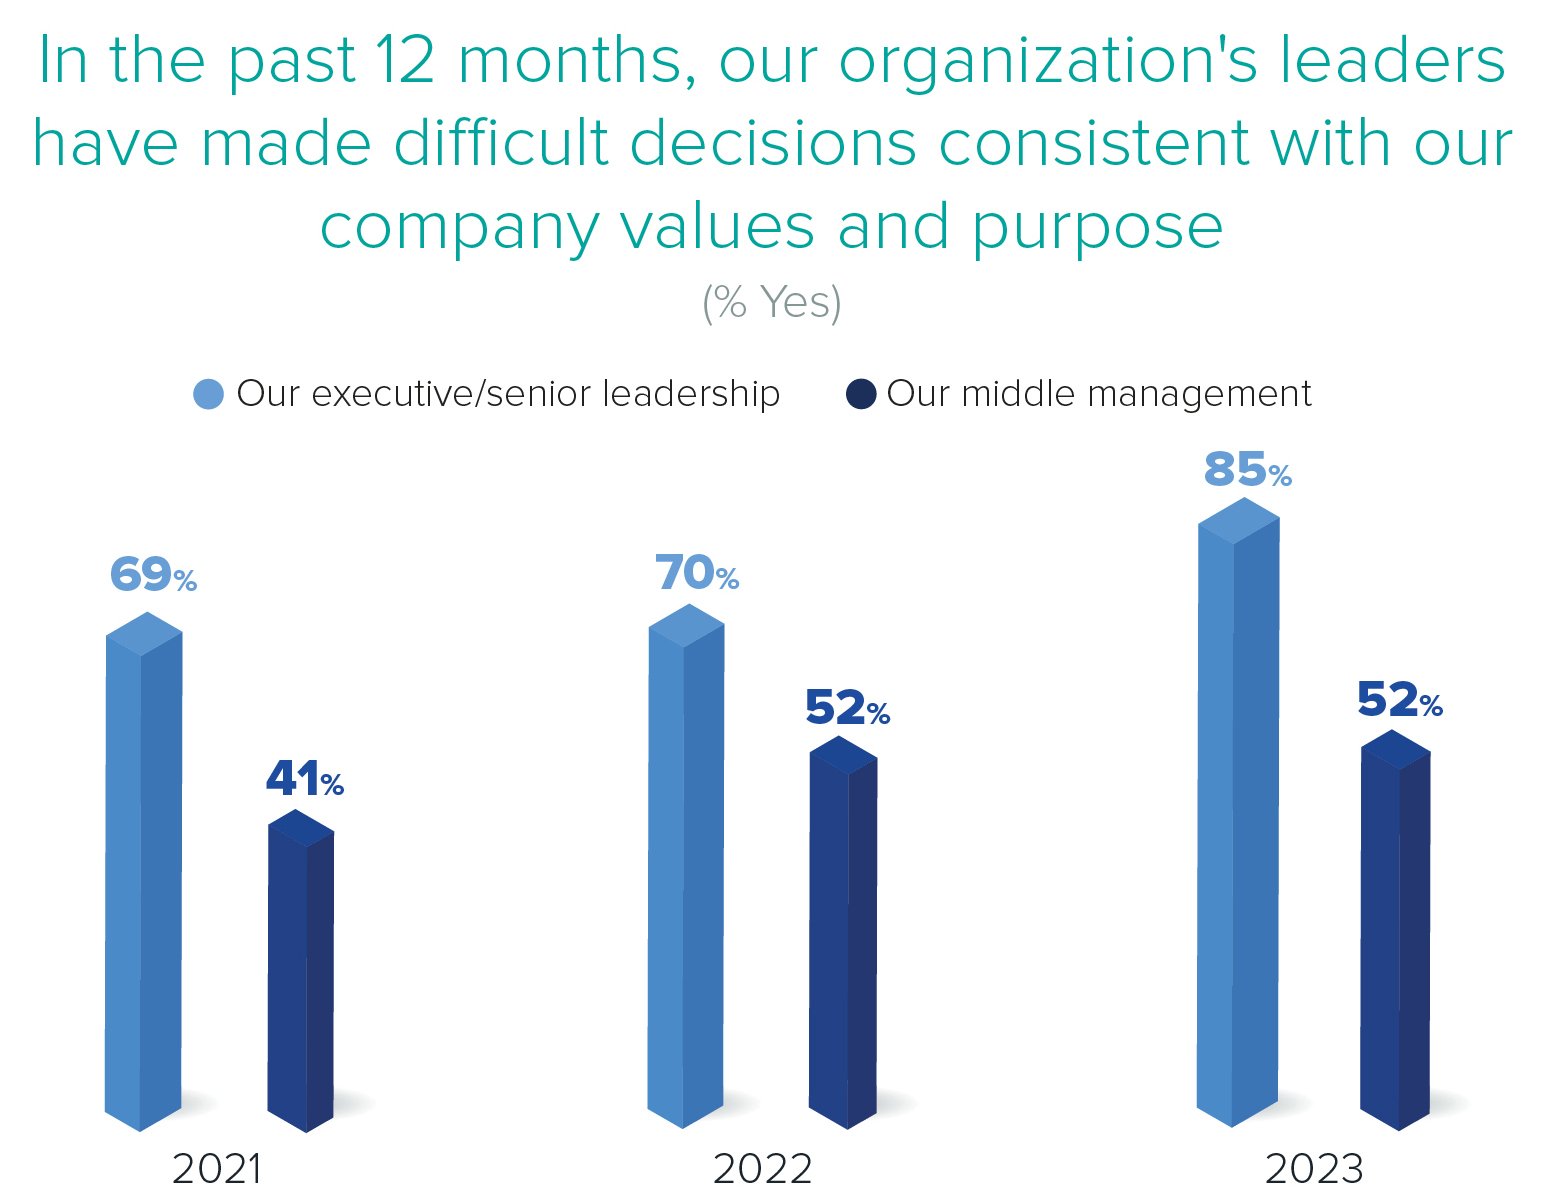 Vertical bar chart: In the past 12 months, our organization's leaders have made difficult decisions consistent with our company values and purpose